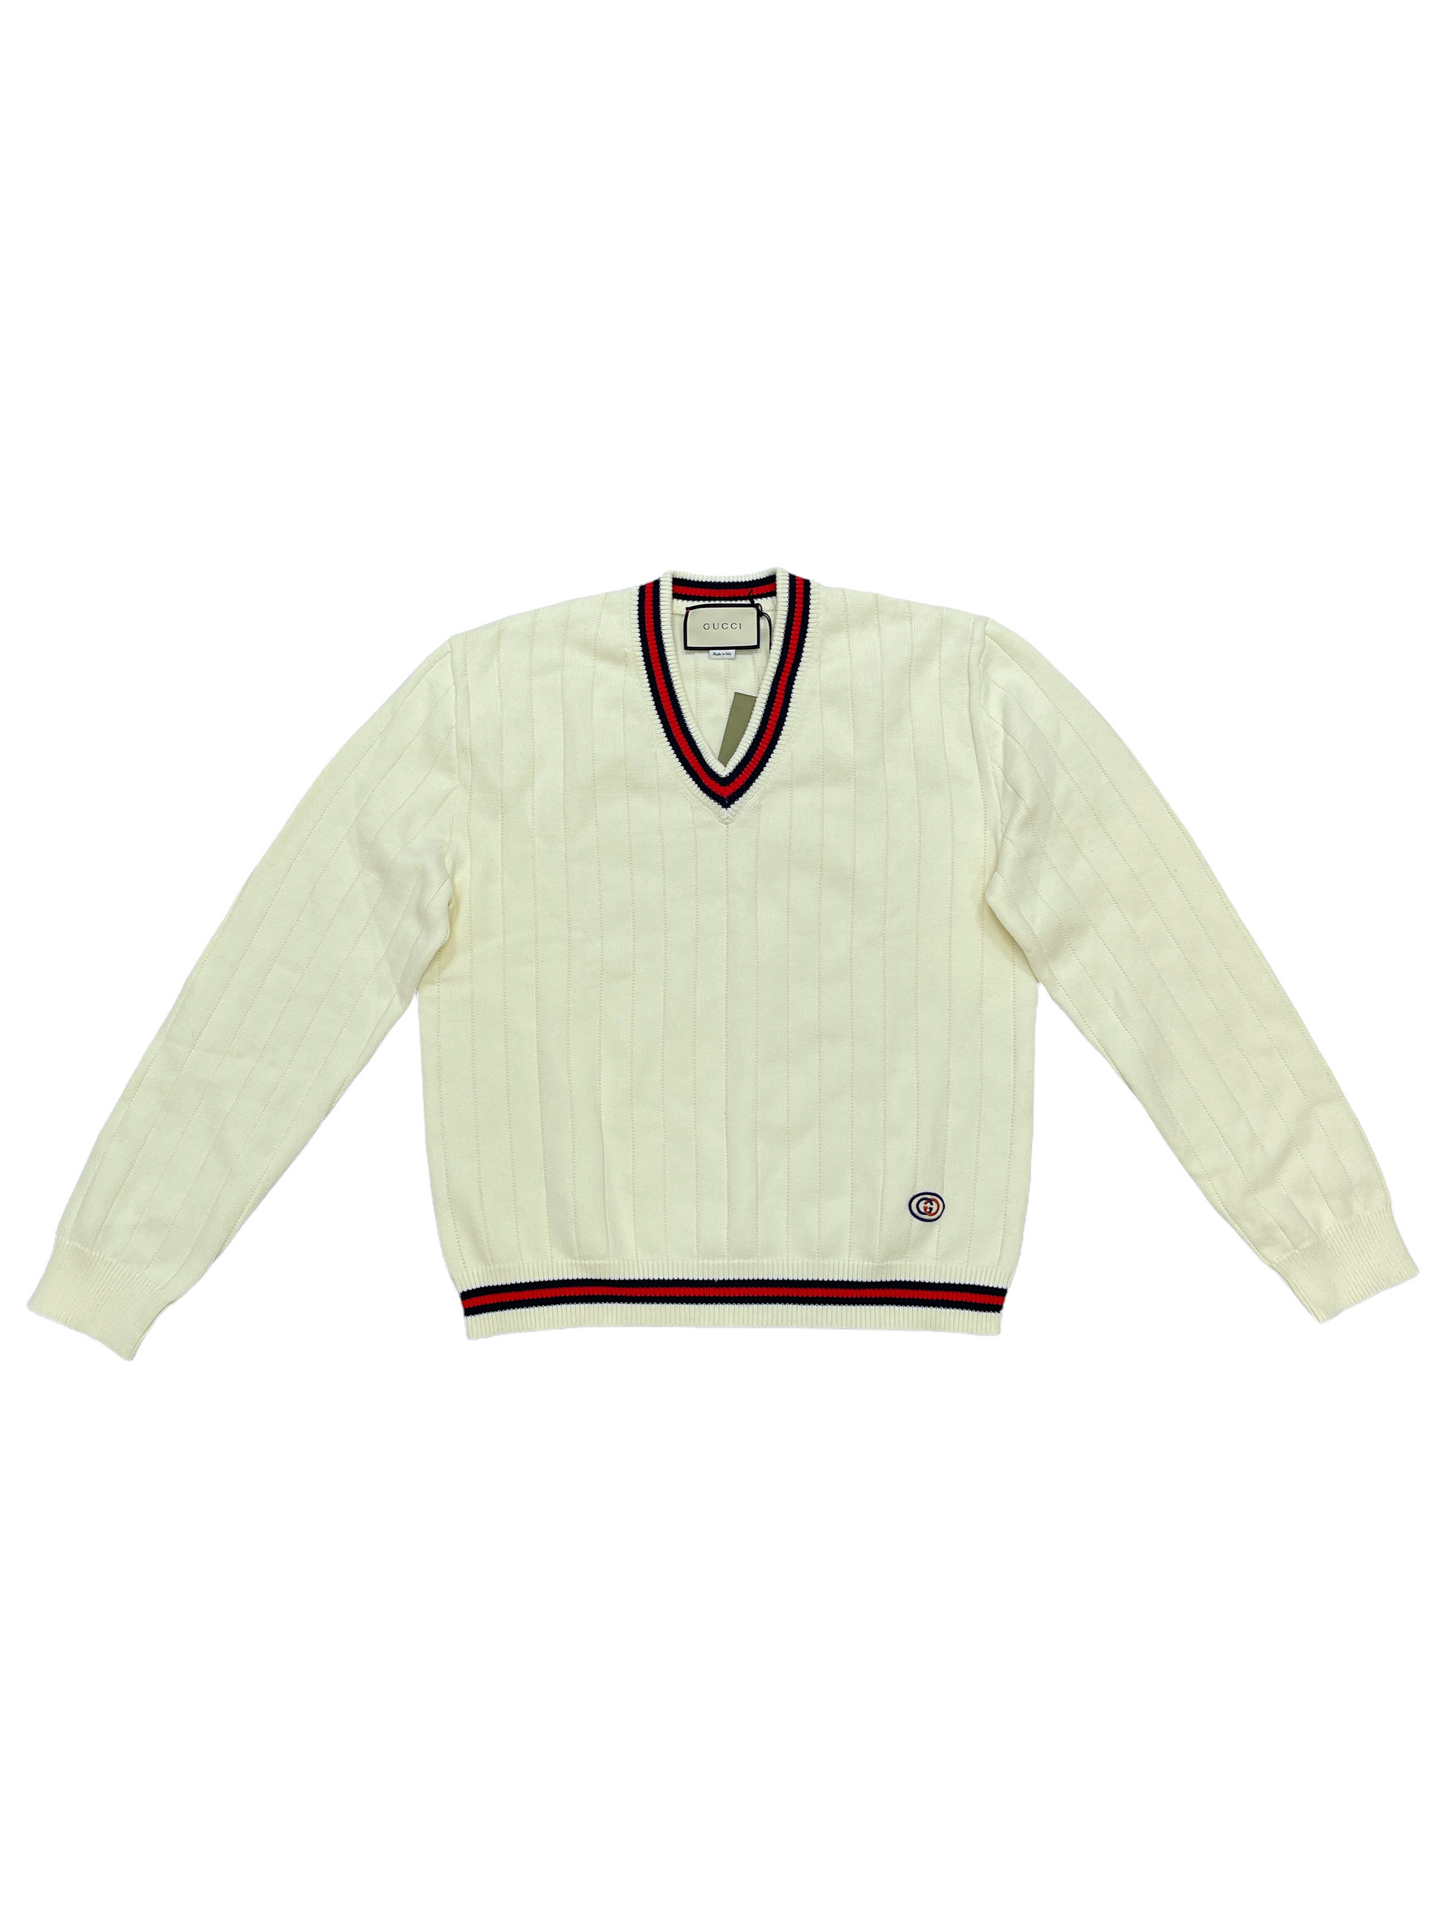 Gucci Cream Cotton Knit Cardigan Large  — Genuine Design Luxury Consignment Calgary, Canada New & Pre-Owned Authentic Clothing, Shoes, Accessories.